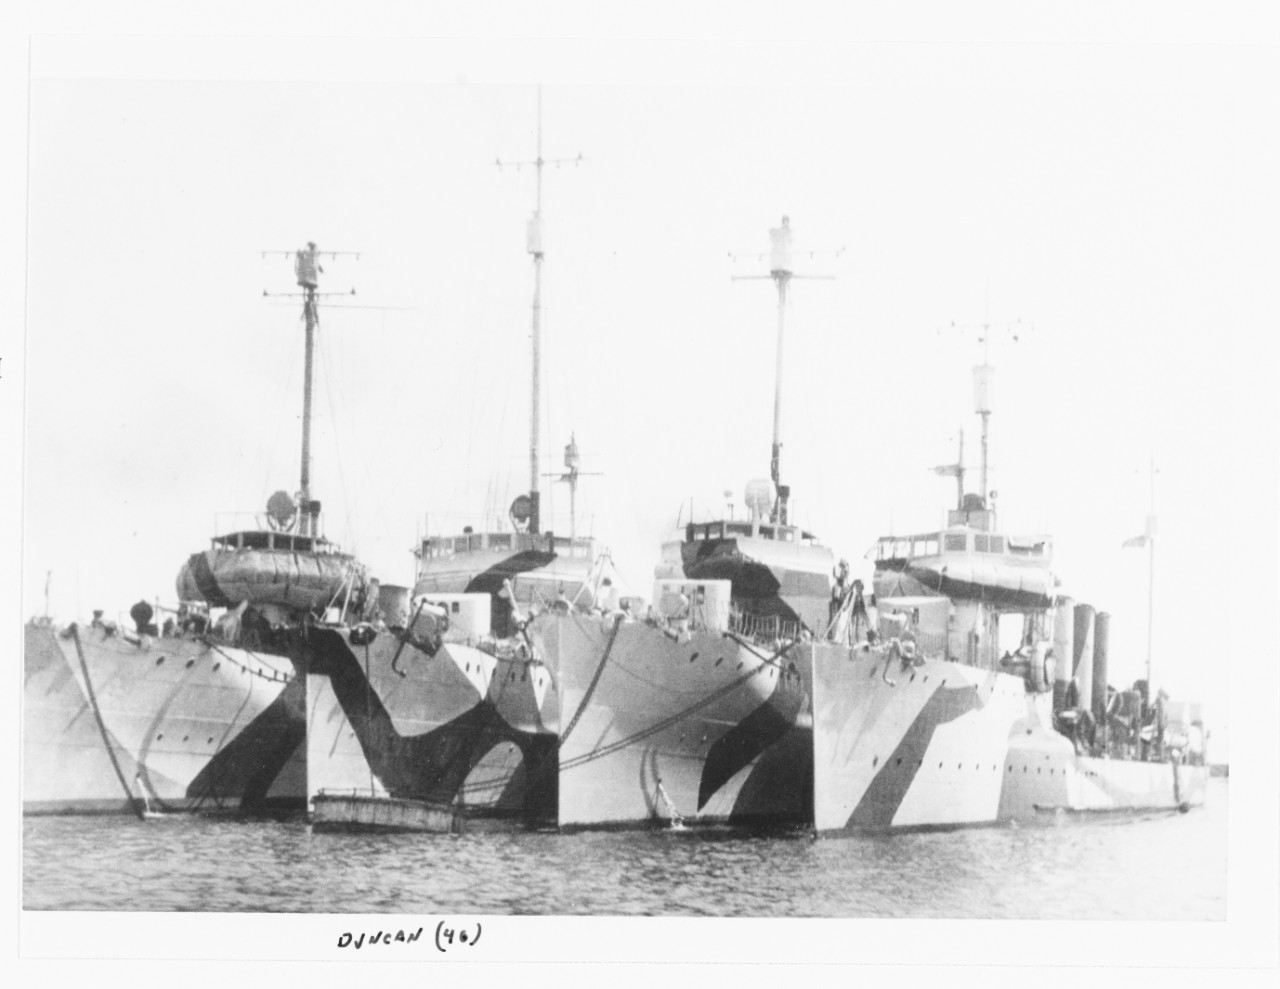 Destroyers moored at Brest, France, circa 1918. The right-hand ship is probably Ammen, second from left is Duncan (Destroyer No. 46). Note variations in application of “dazzle” camouflage. (Naval History and Heritage Command Photograph NH 100434)